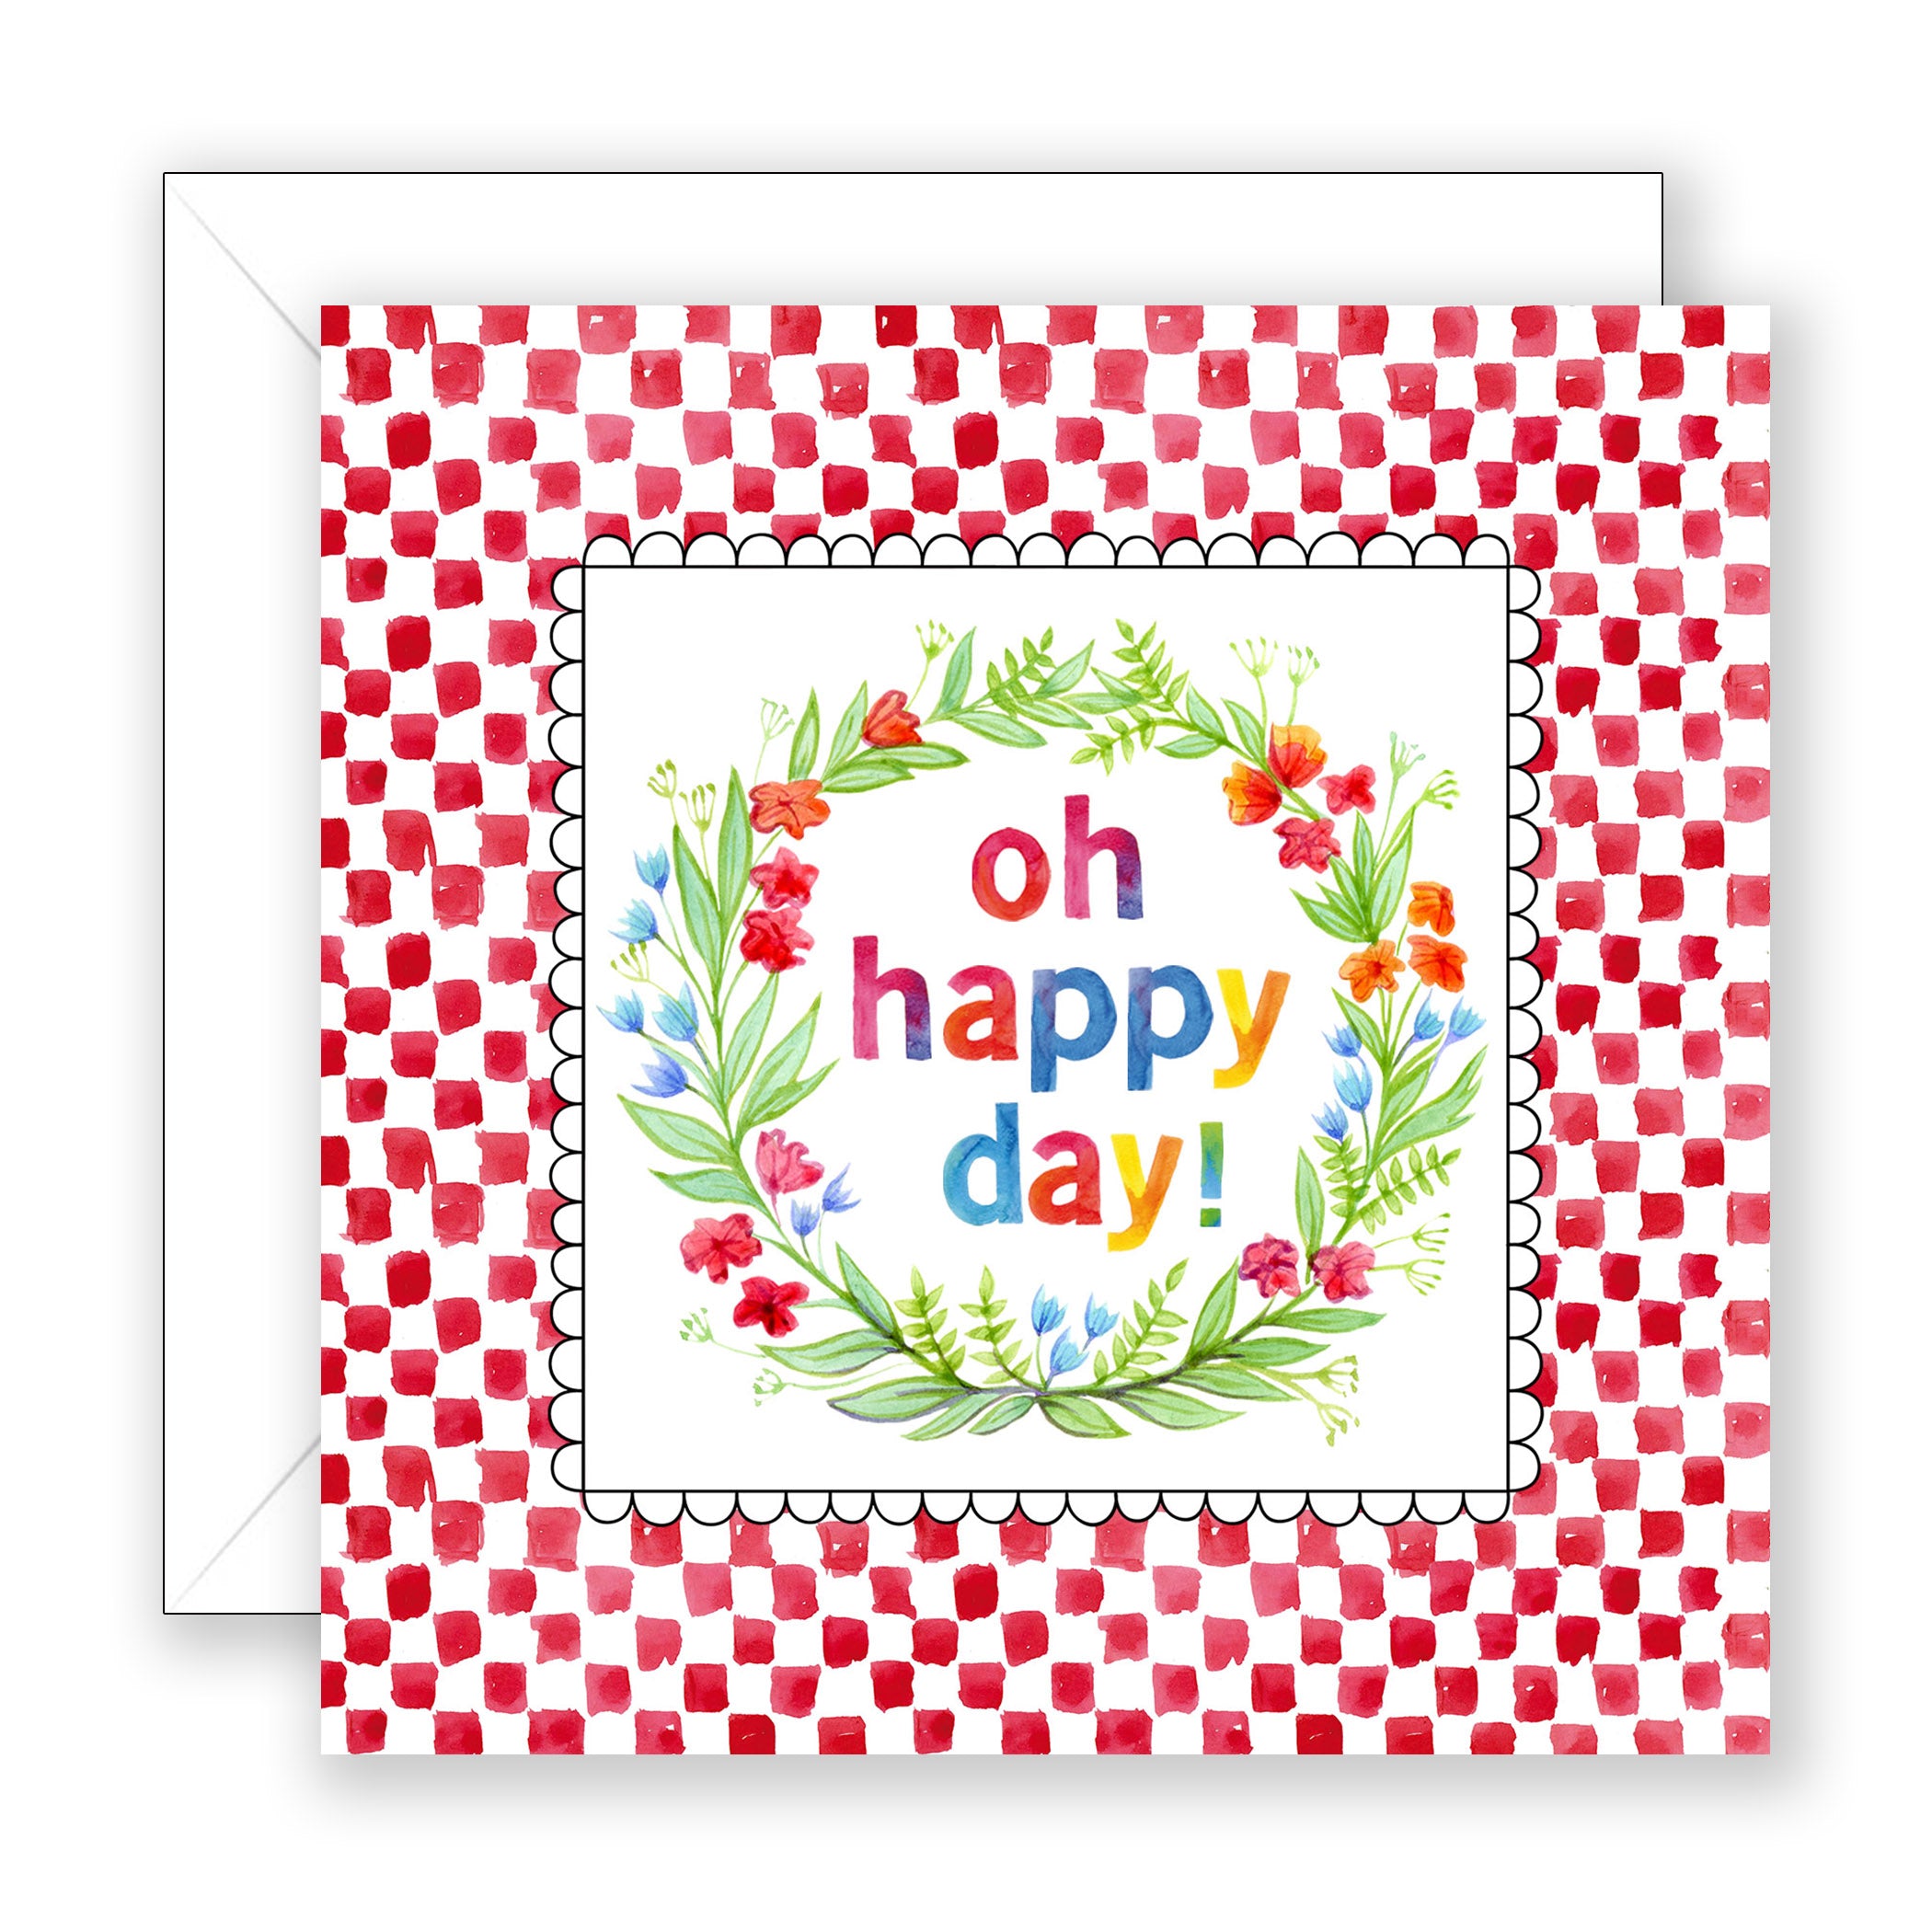 Oh Happy Day - Encouragement Card